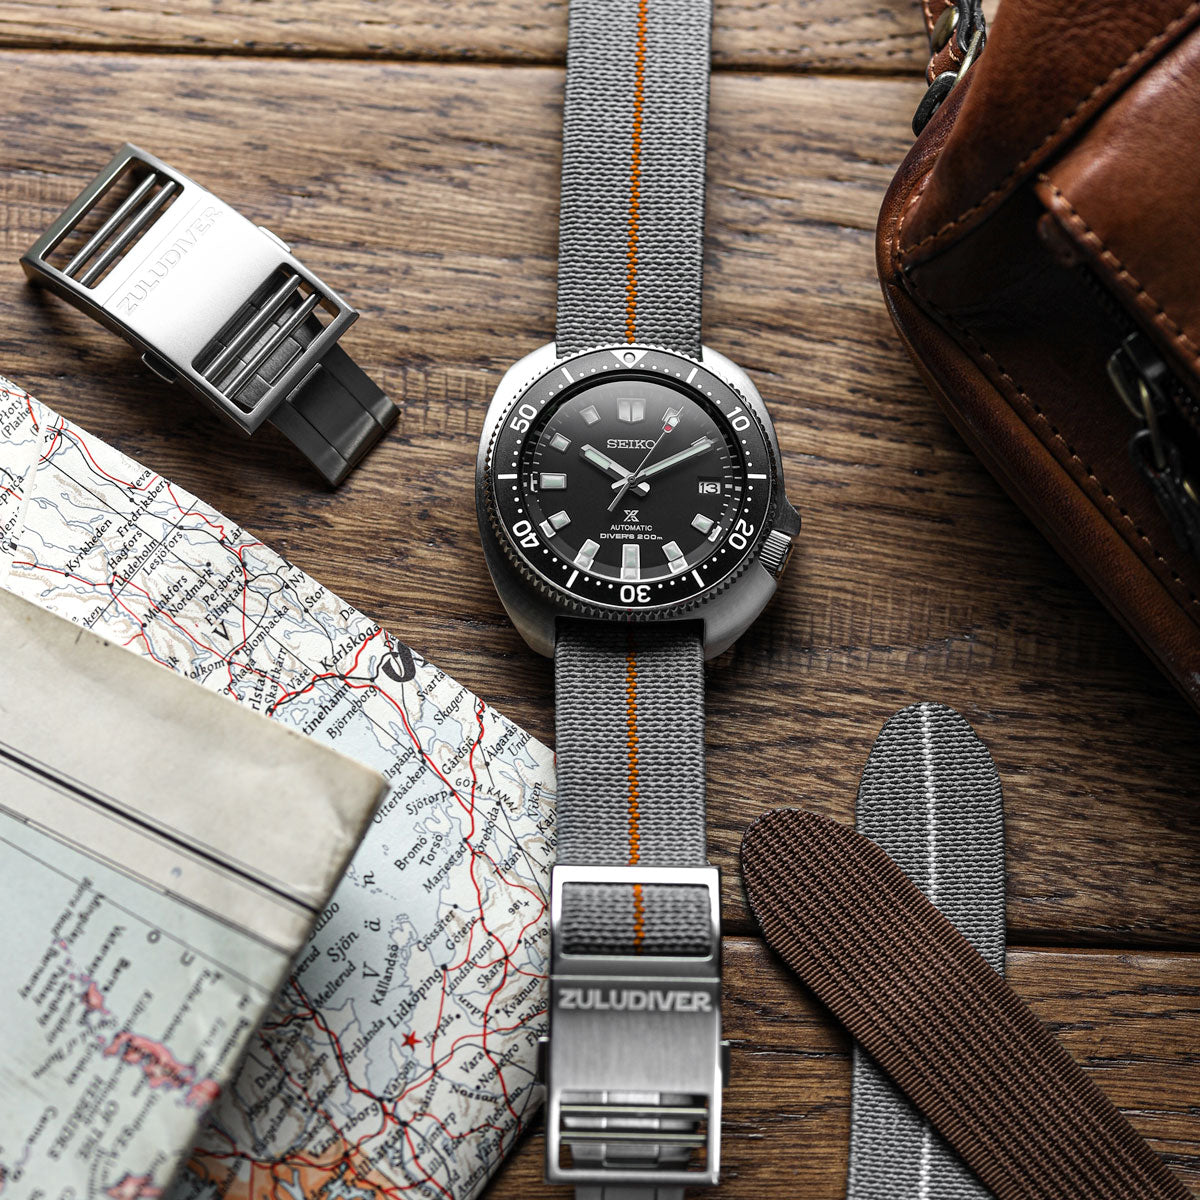 ADDITIONAL - OctoPod Watch Straps - Norra - additional image 1